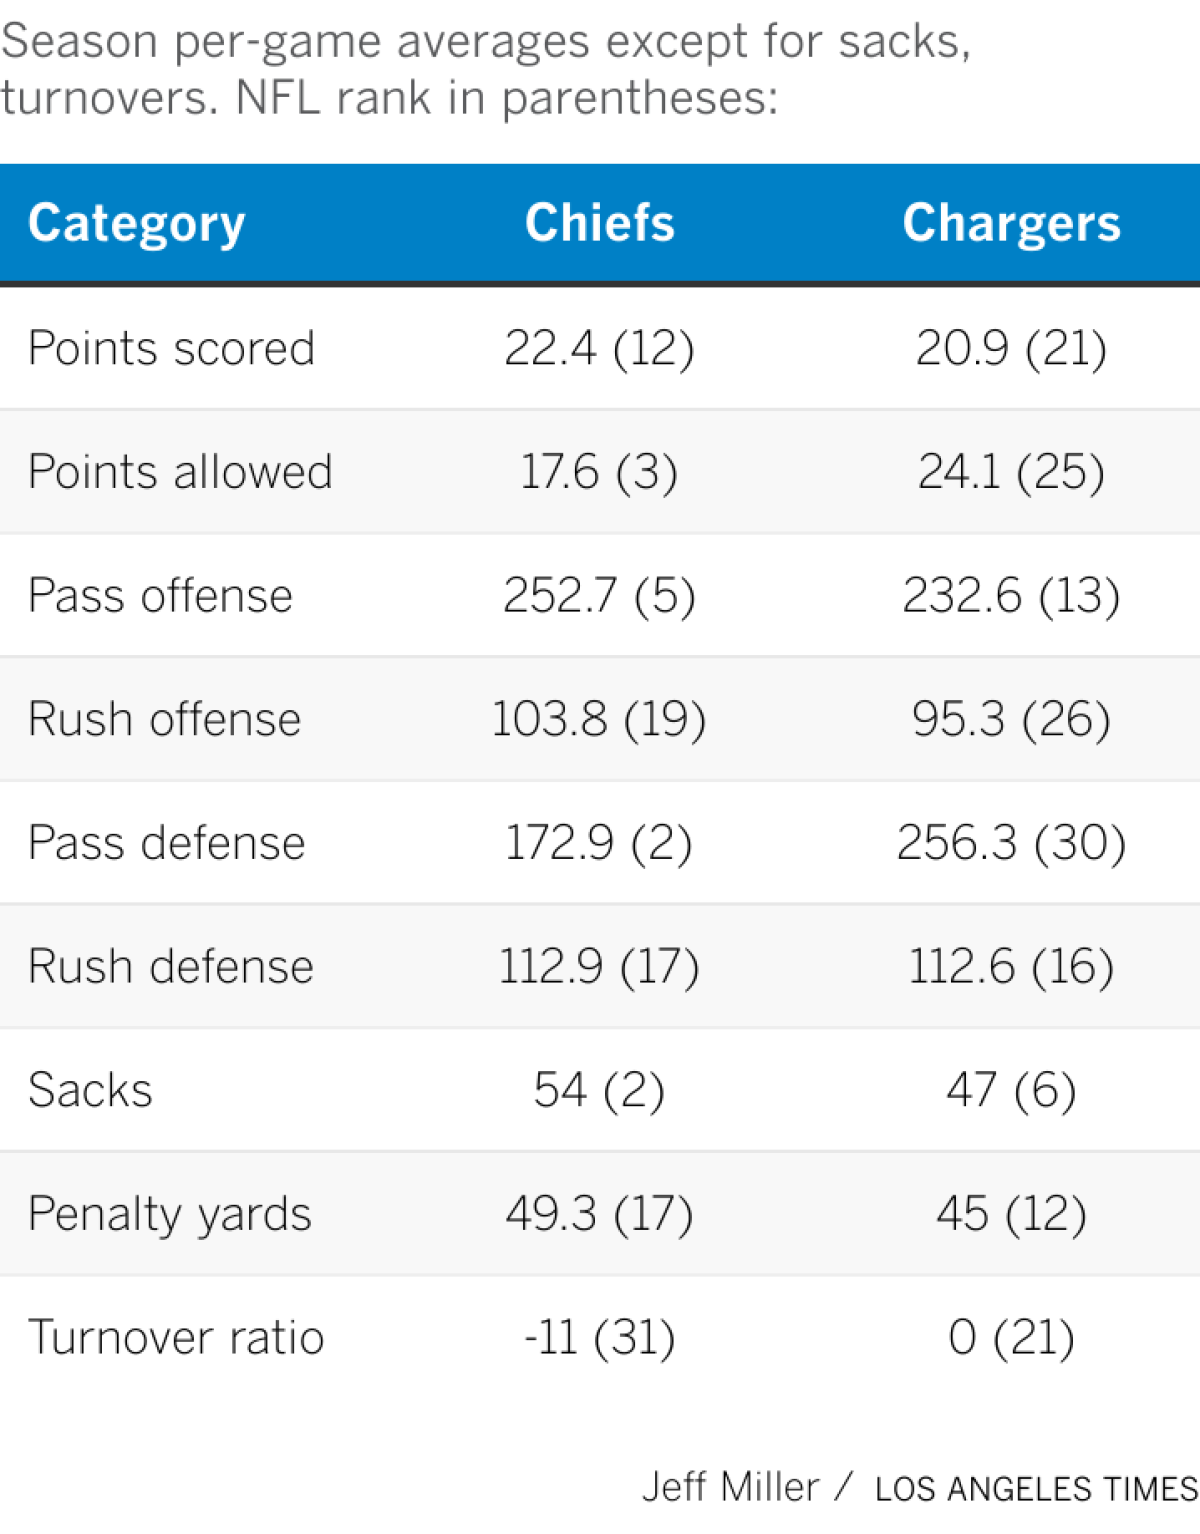 A chart comparing season stats for the Chargers and Chiefs.